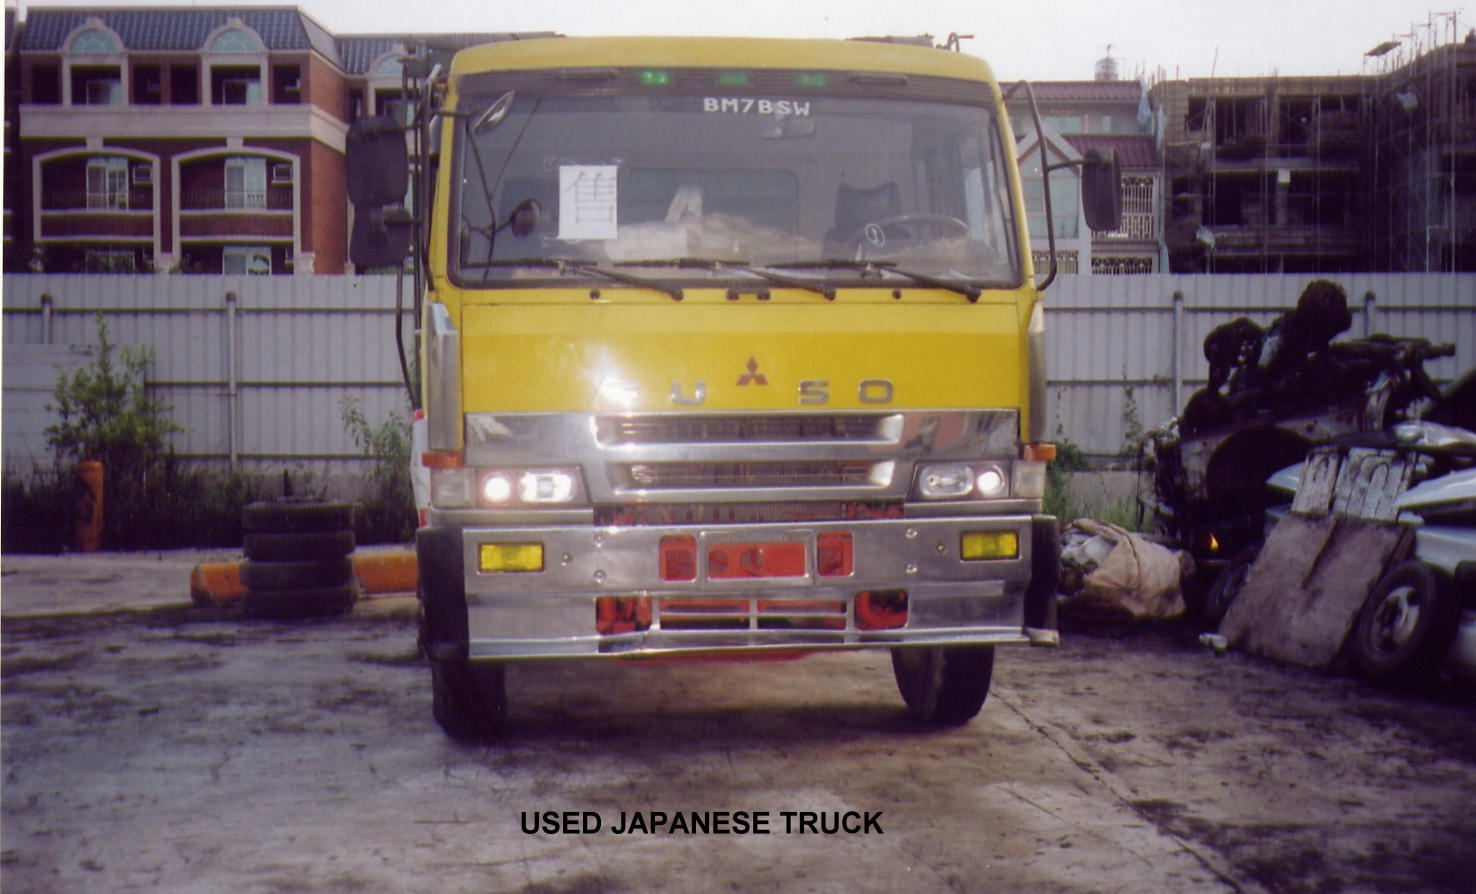 USED JAPANESE TRUCK